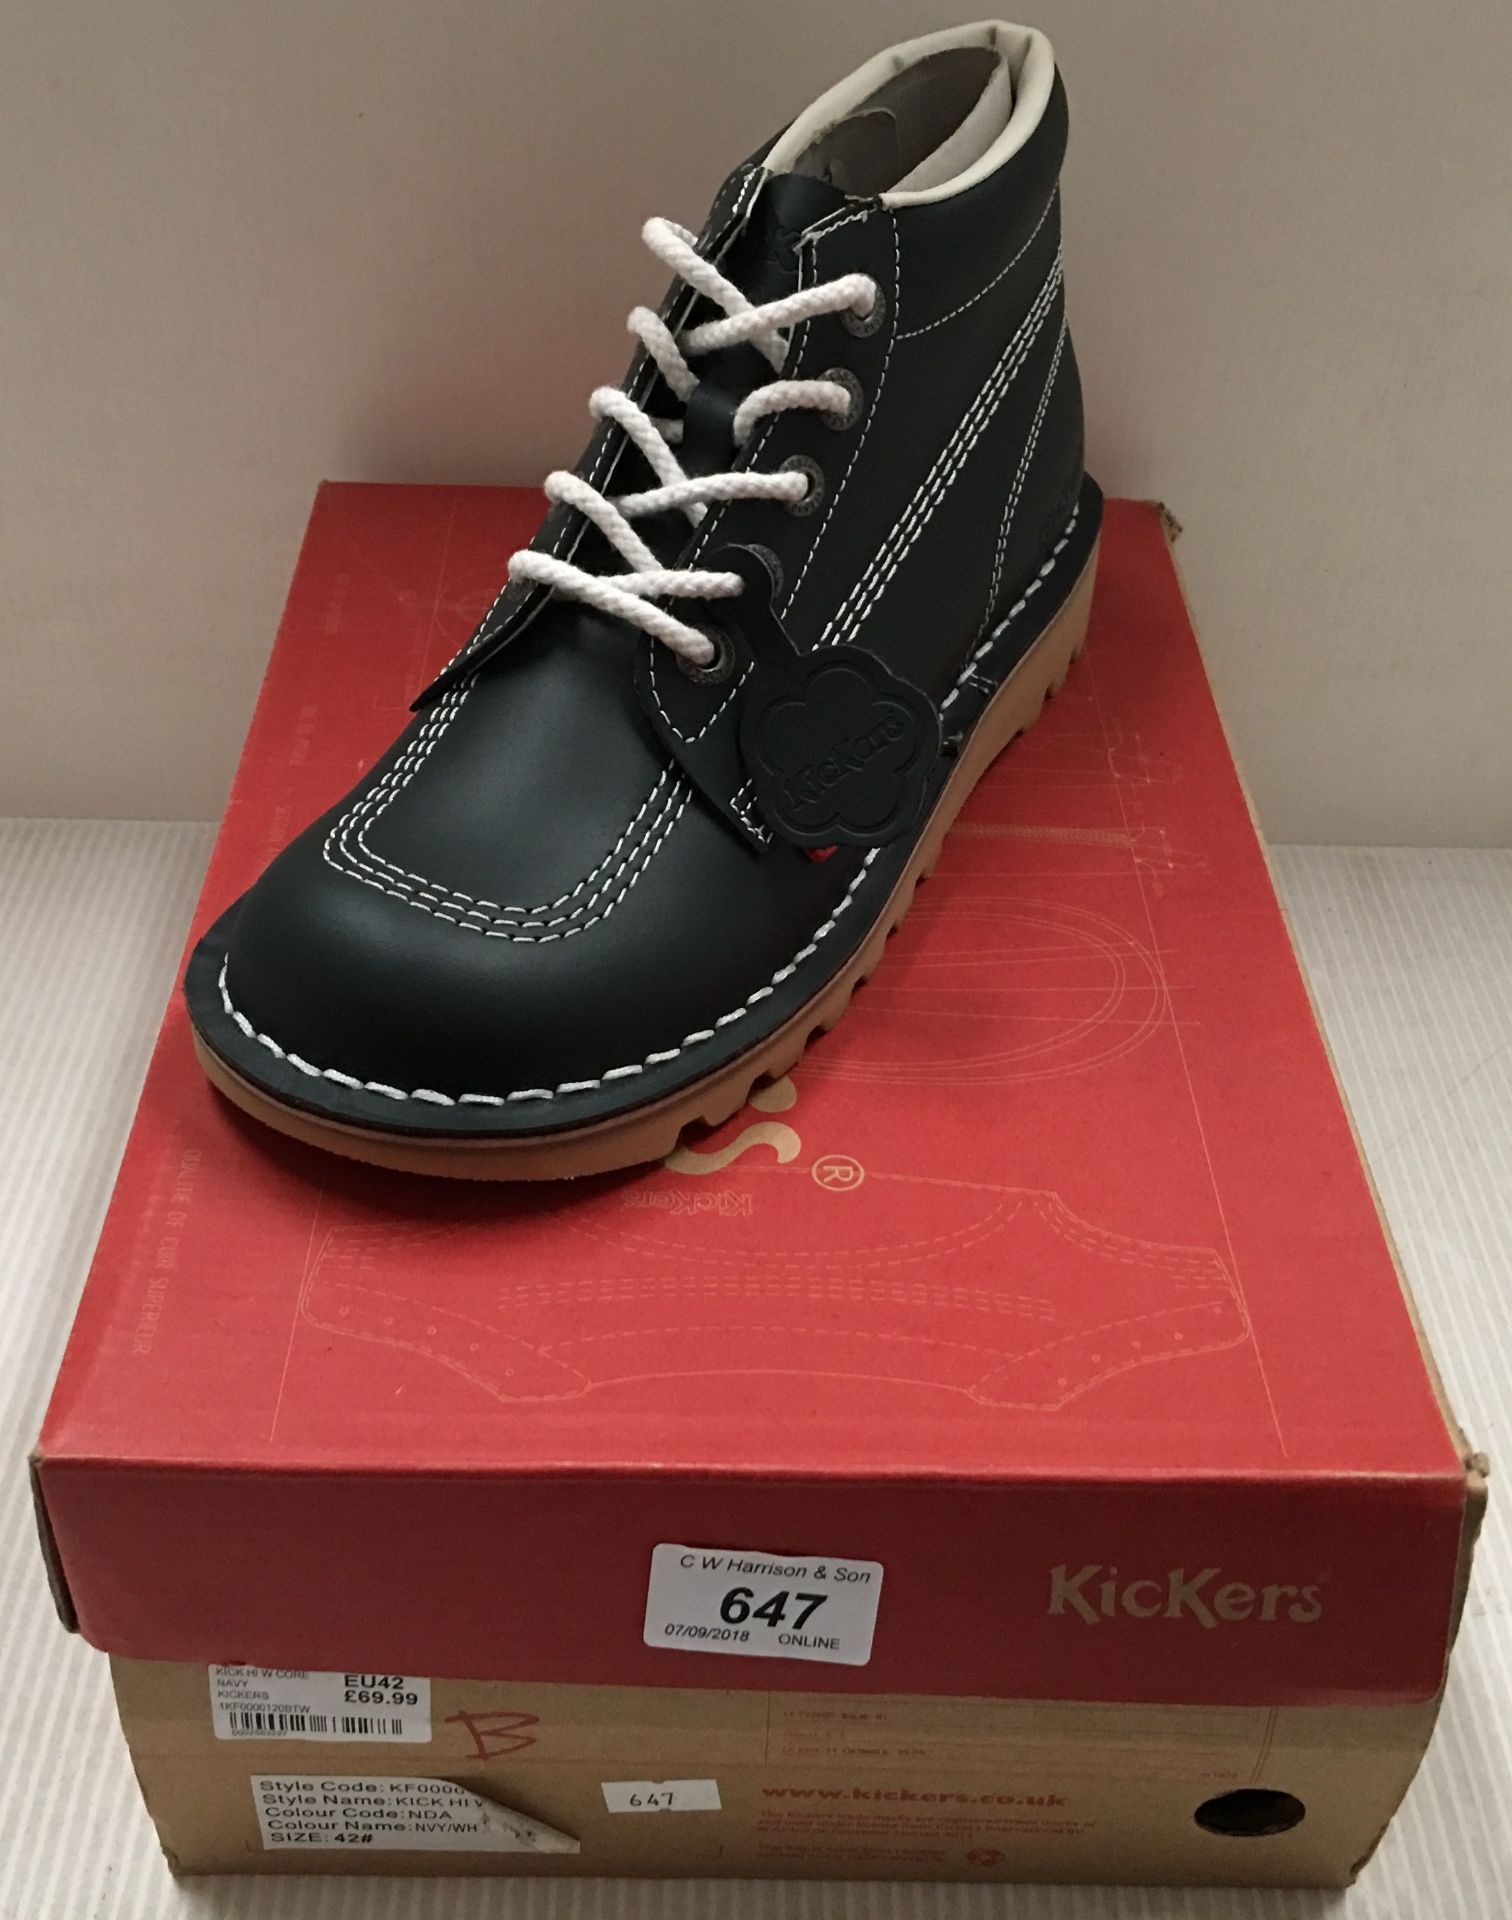 1 x pair of adult's shoes - Kickers - si